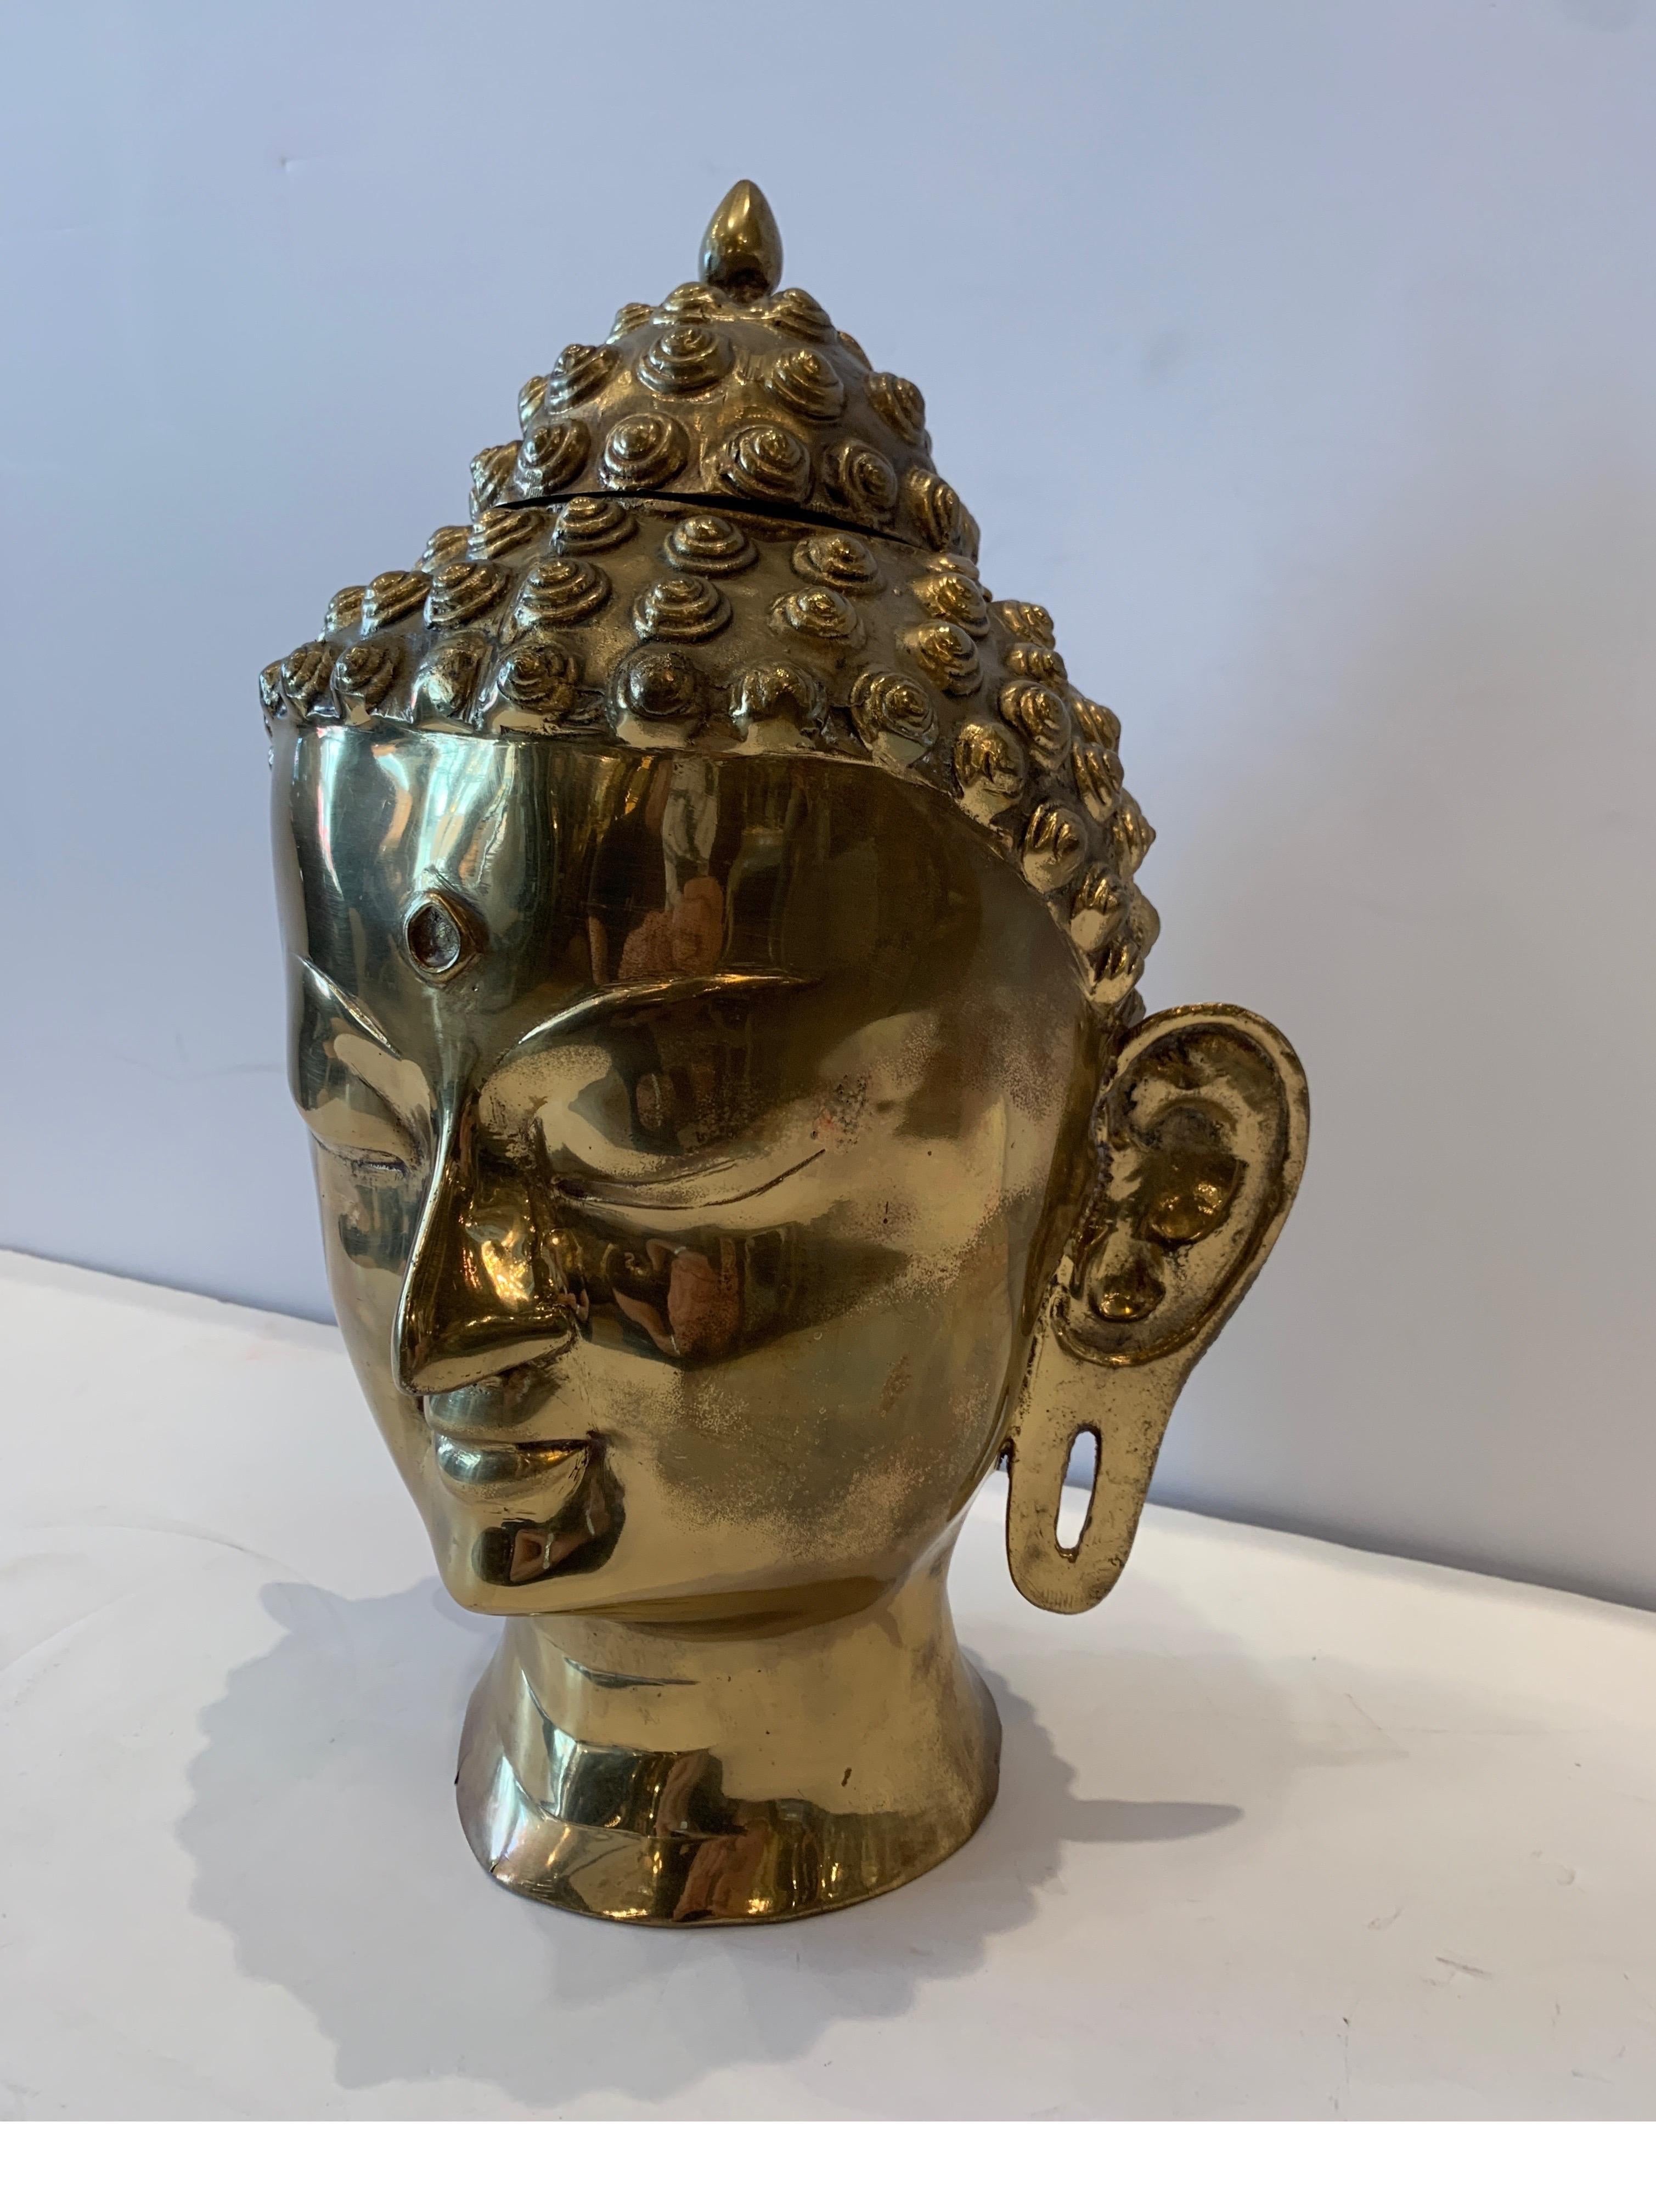 Decorator cast brass Buddha head from Thailand, circa 1970s 16 inches tall minor expected oxidation to the surface.